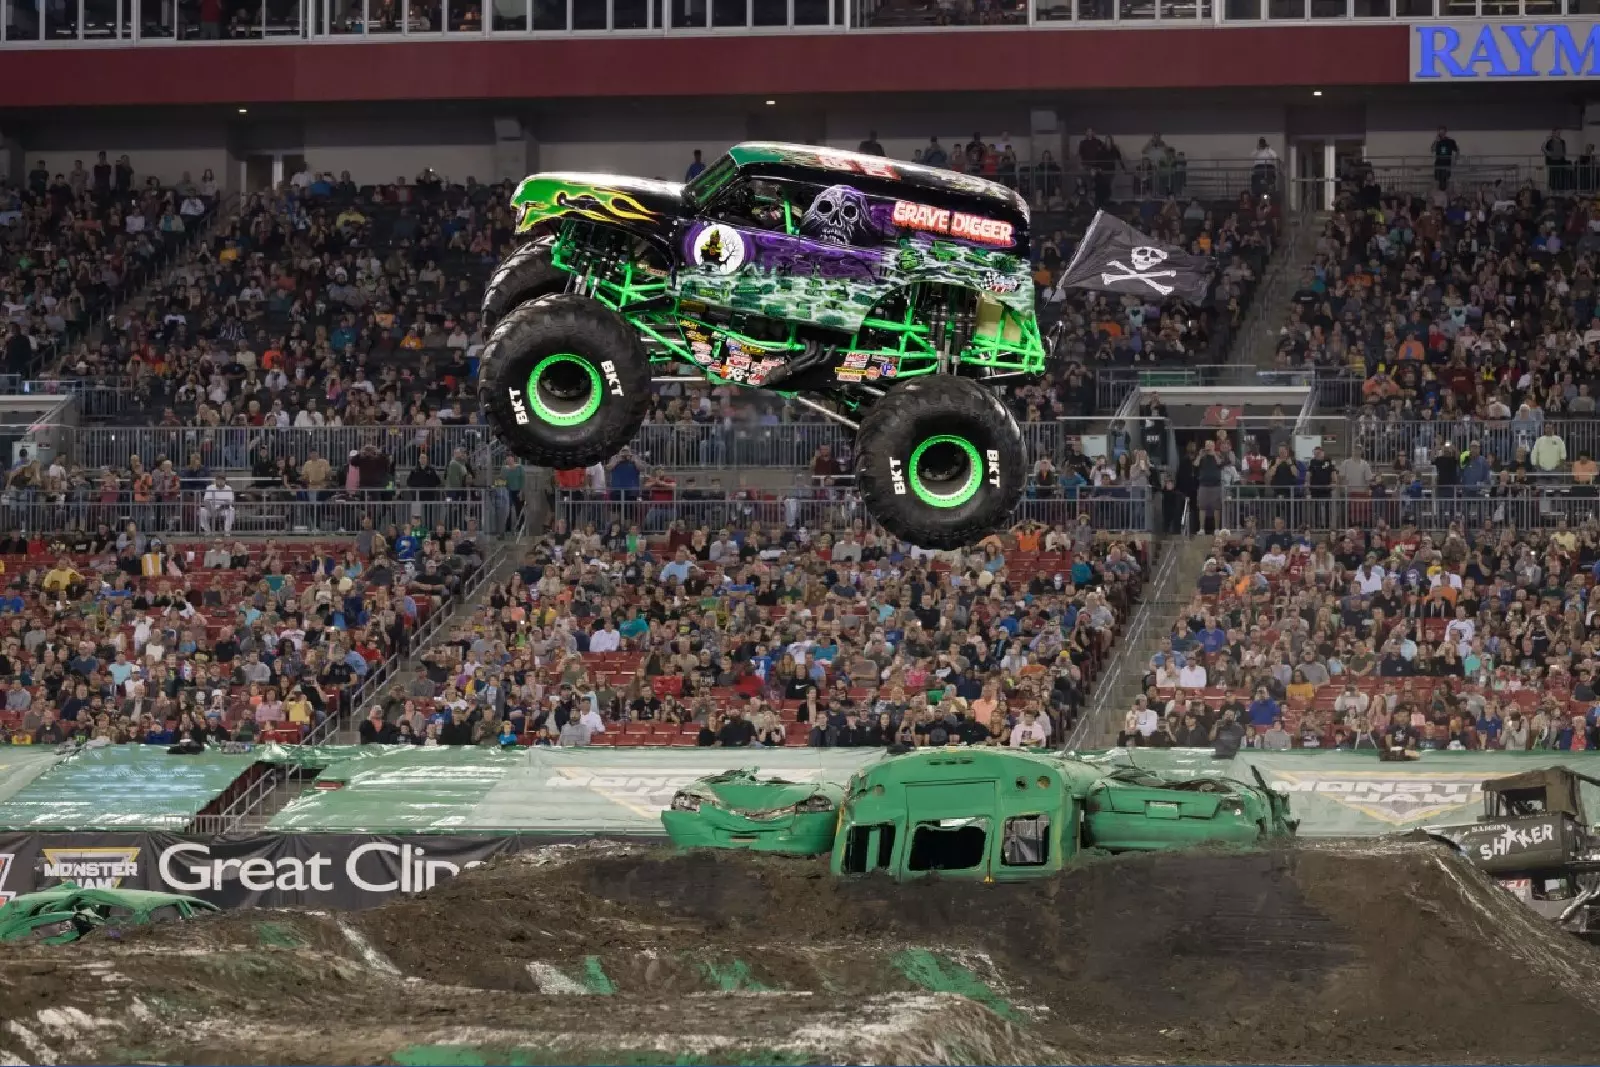 Monster Trucks” Behind the Scenes: Check out the tricks & special